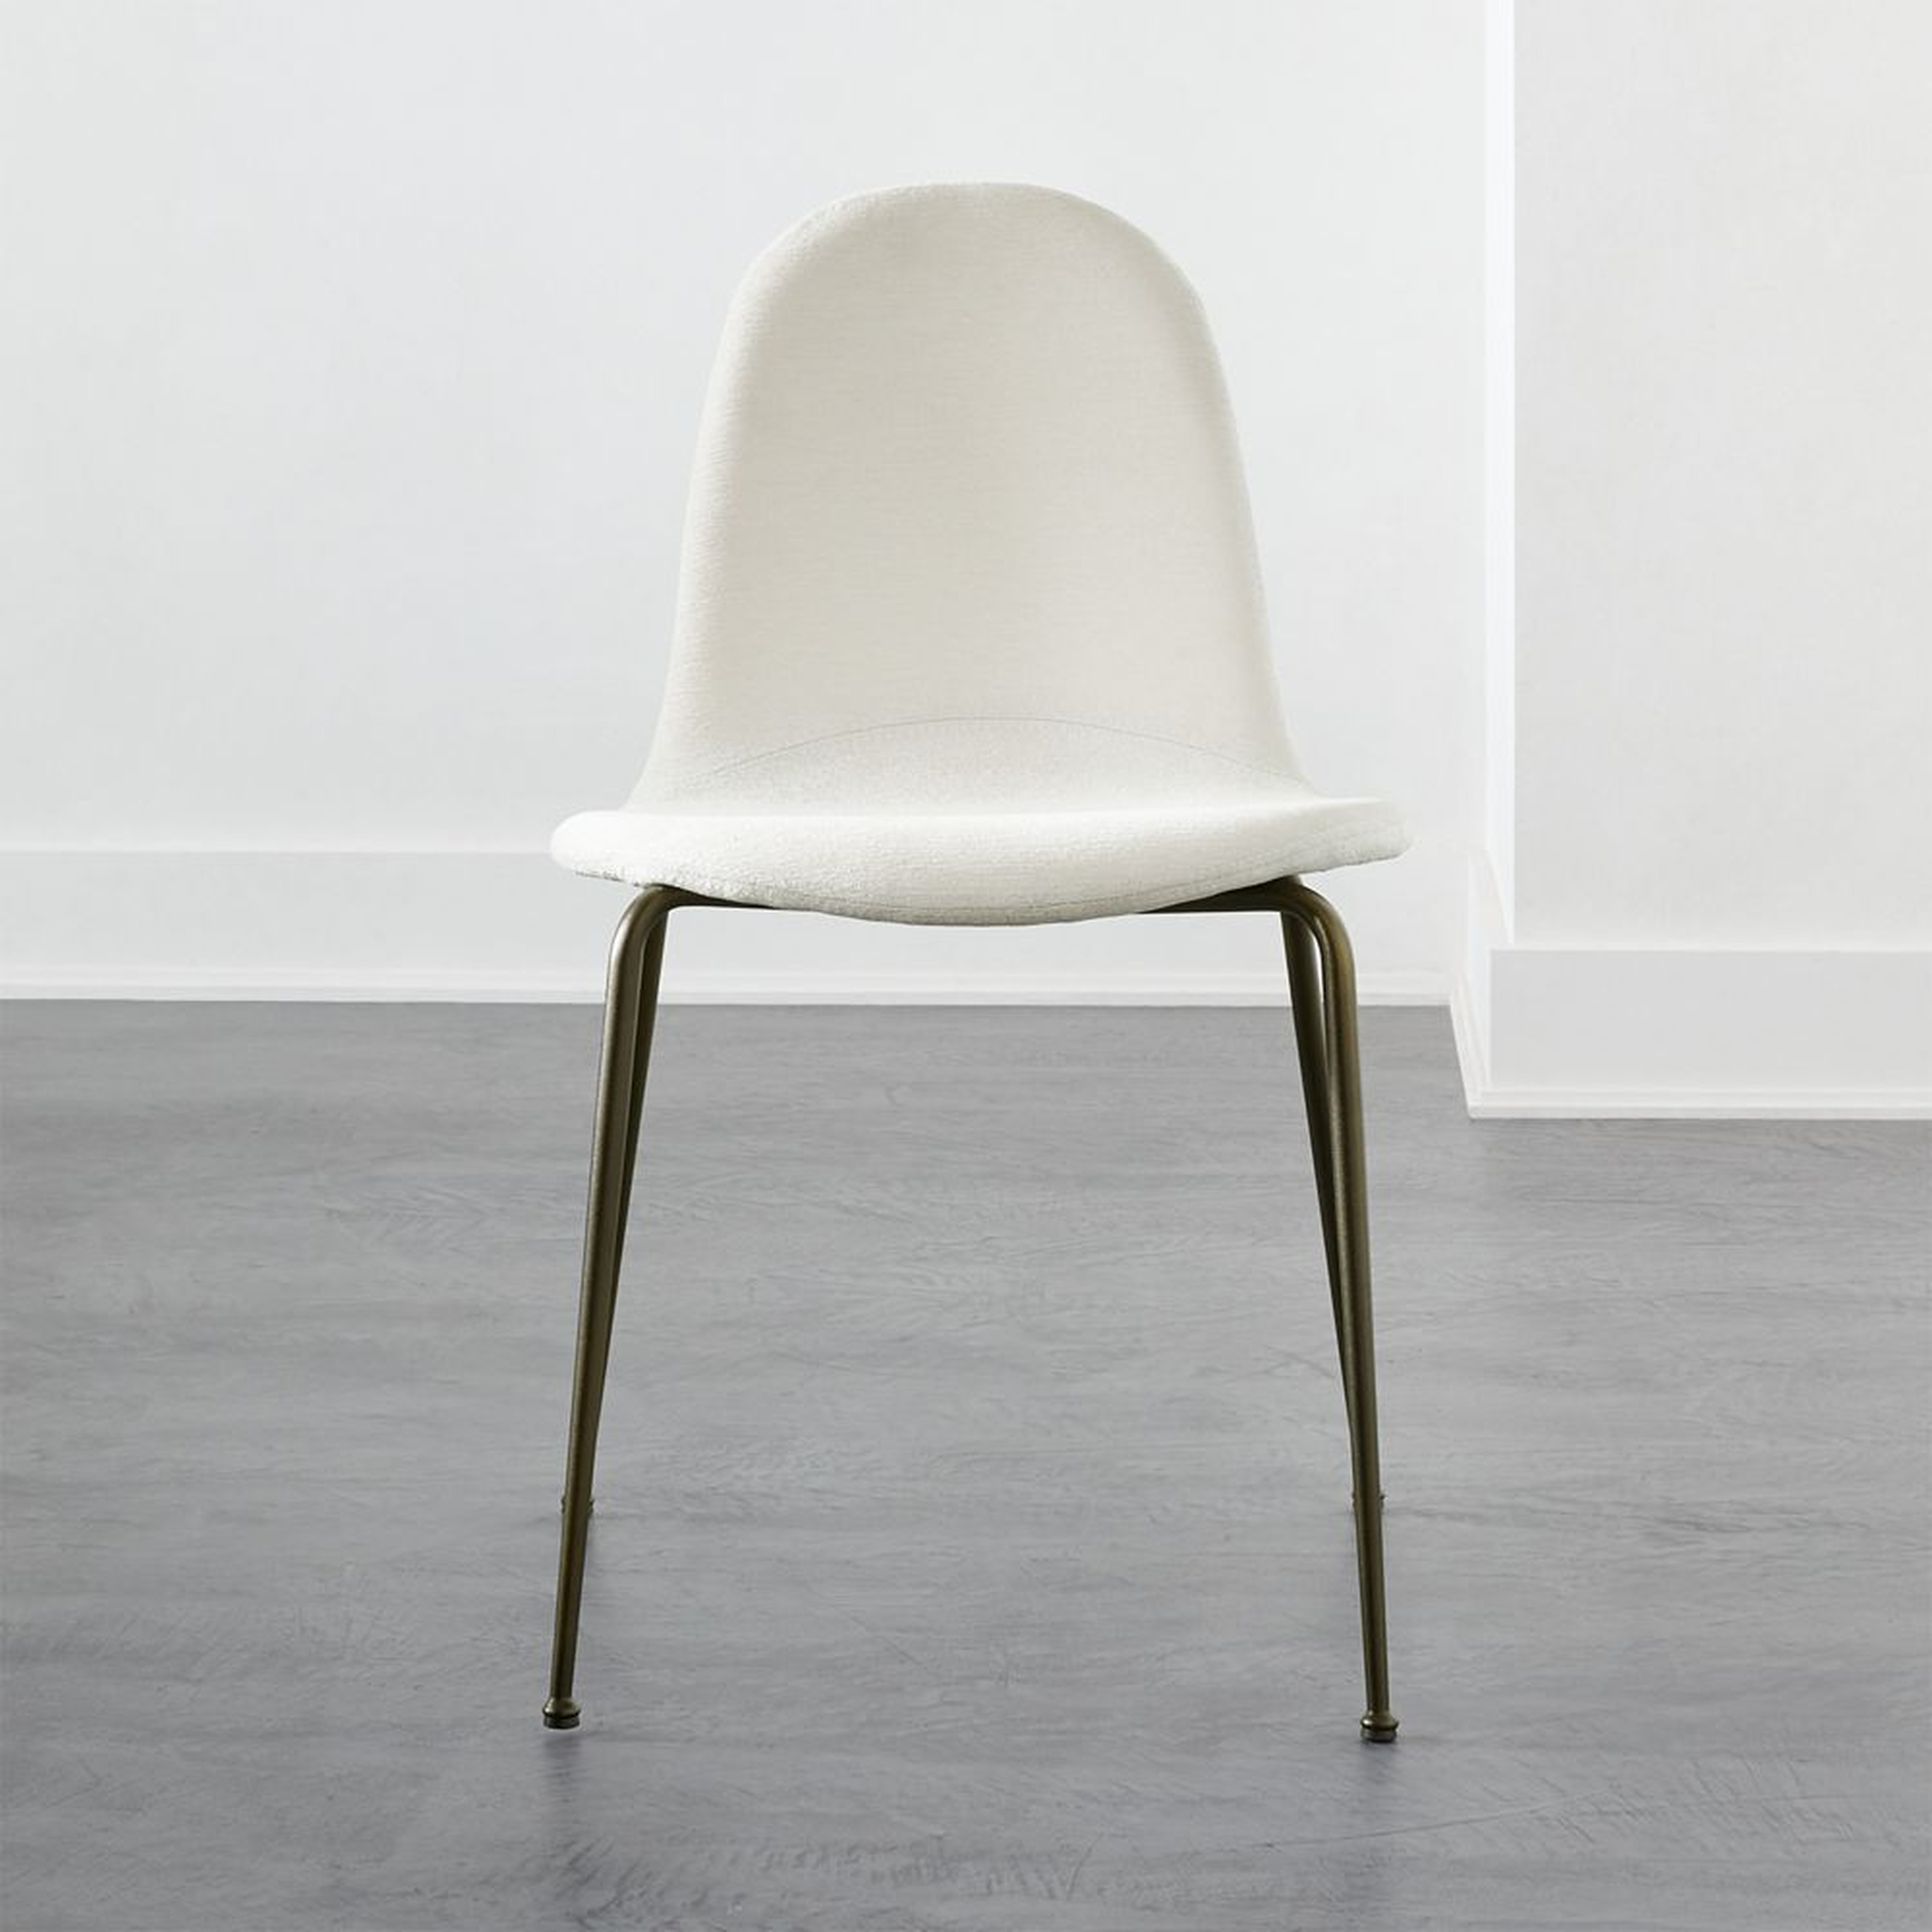 Corra Rounded Dining Chair - CB2